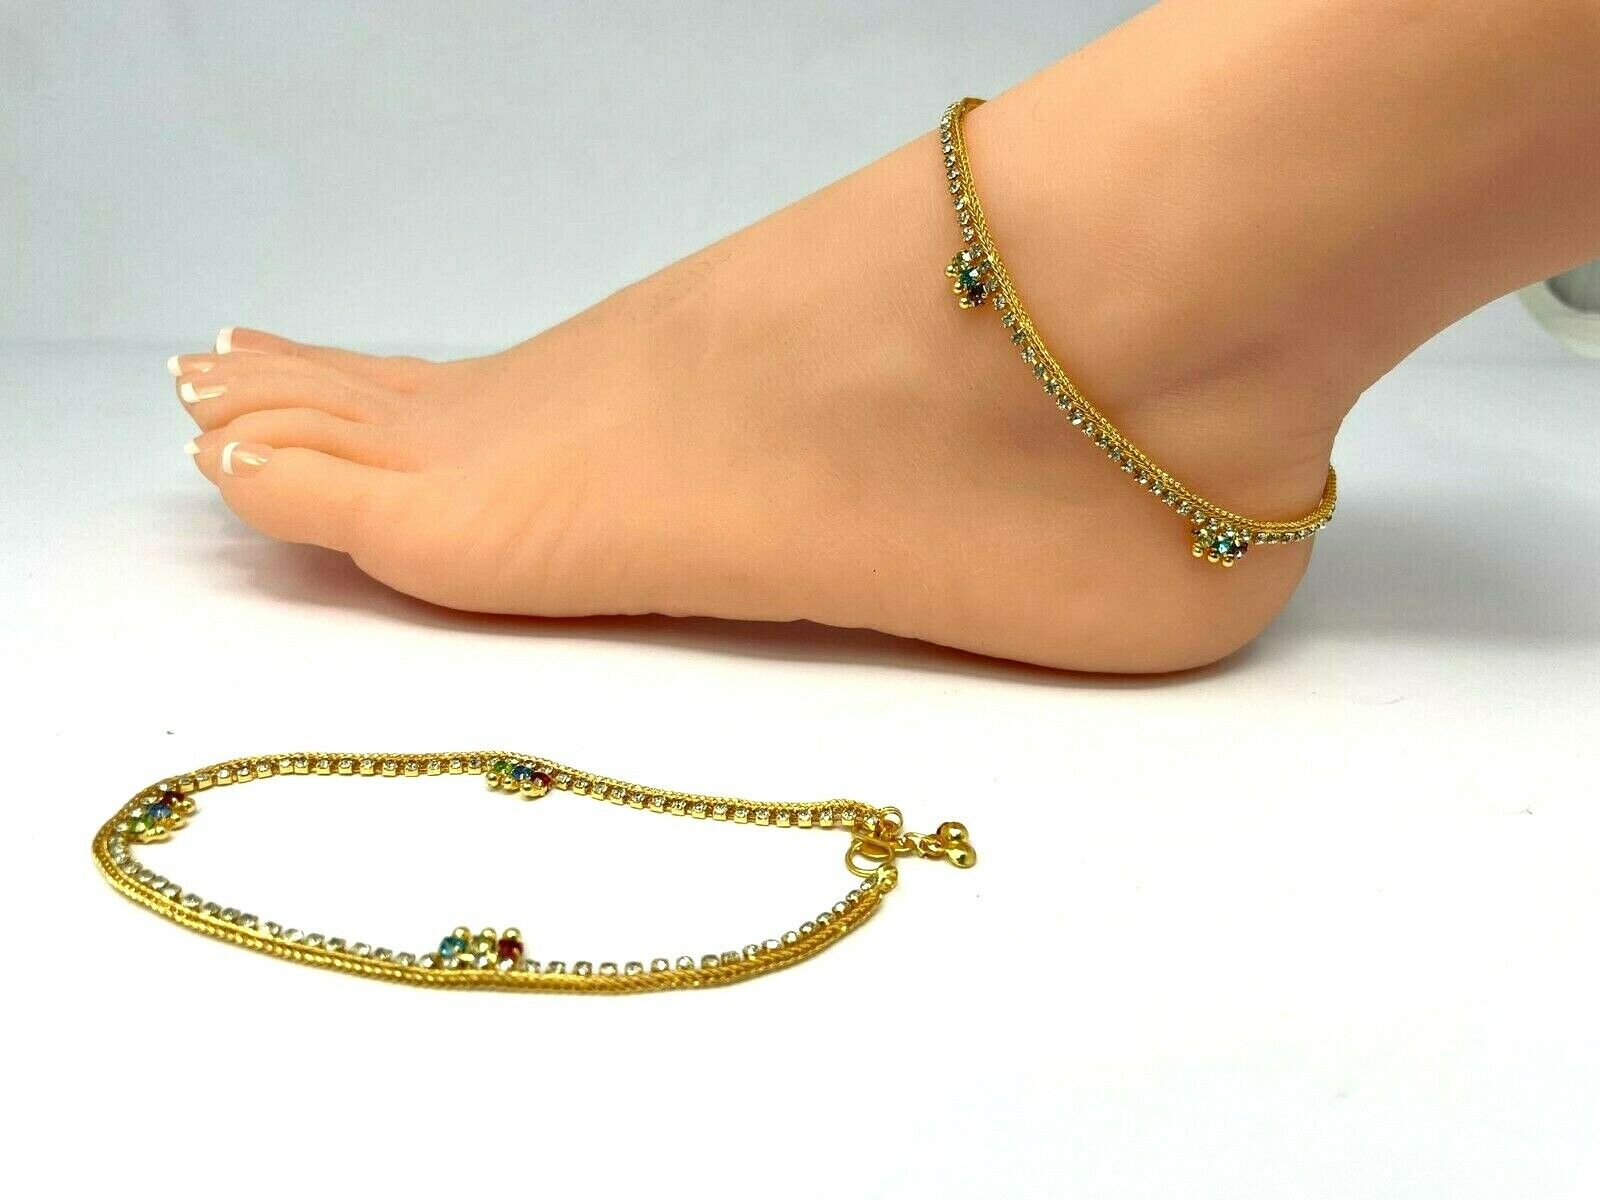 A1 - Anklets Payal with Rhinestone Pair for Legs Indian Jewelry